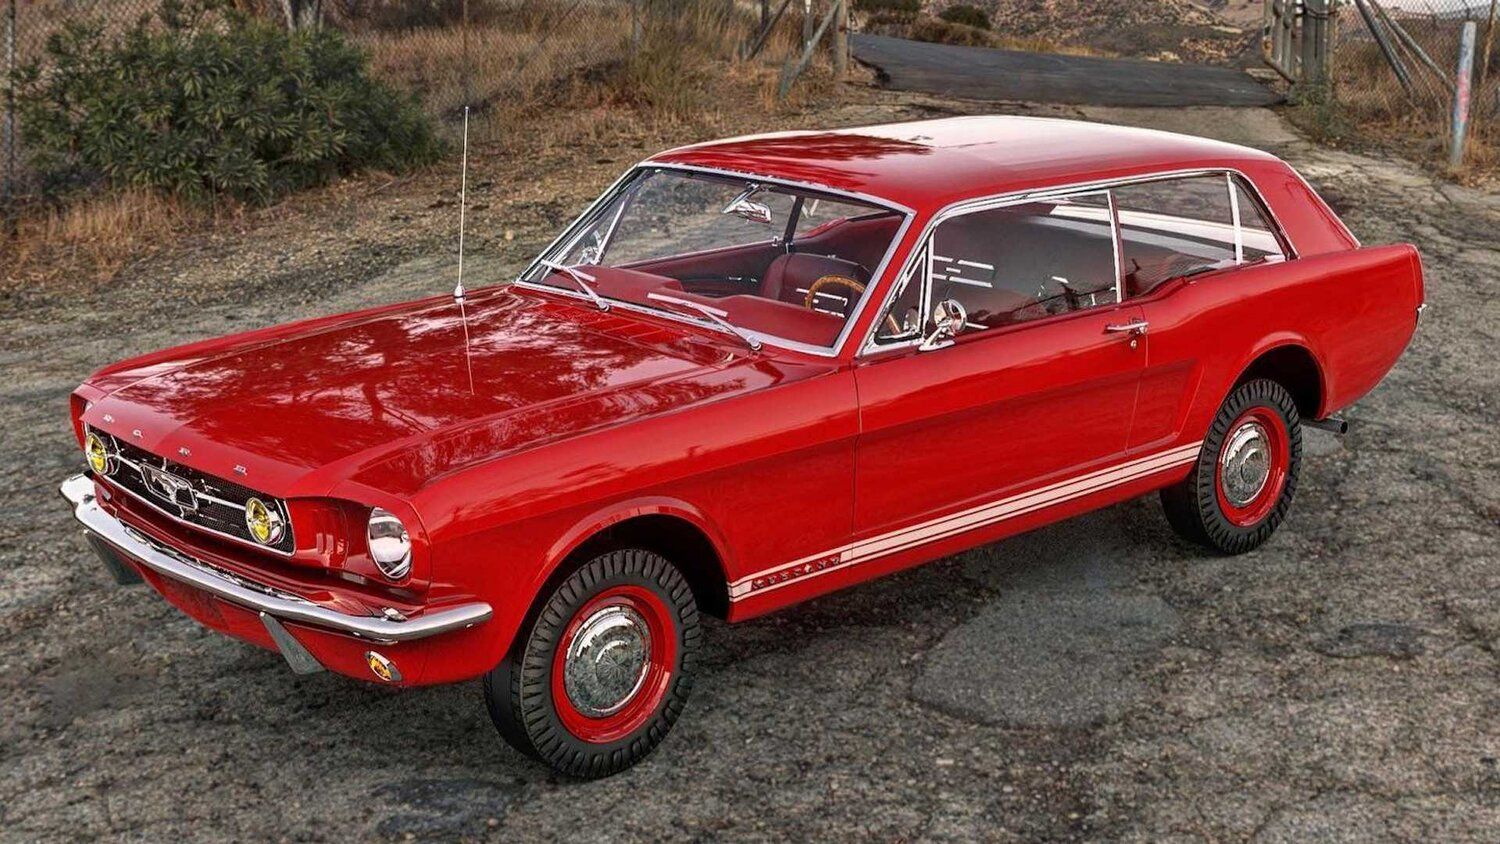 1966 Mustang station wagon parked off the road